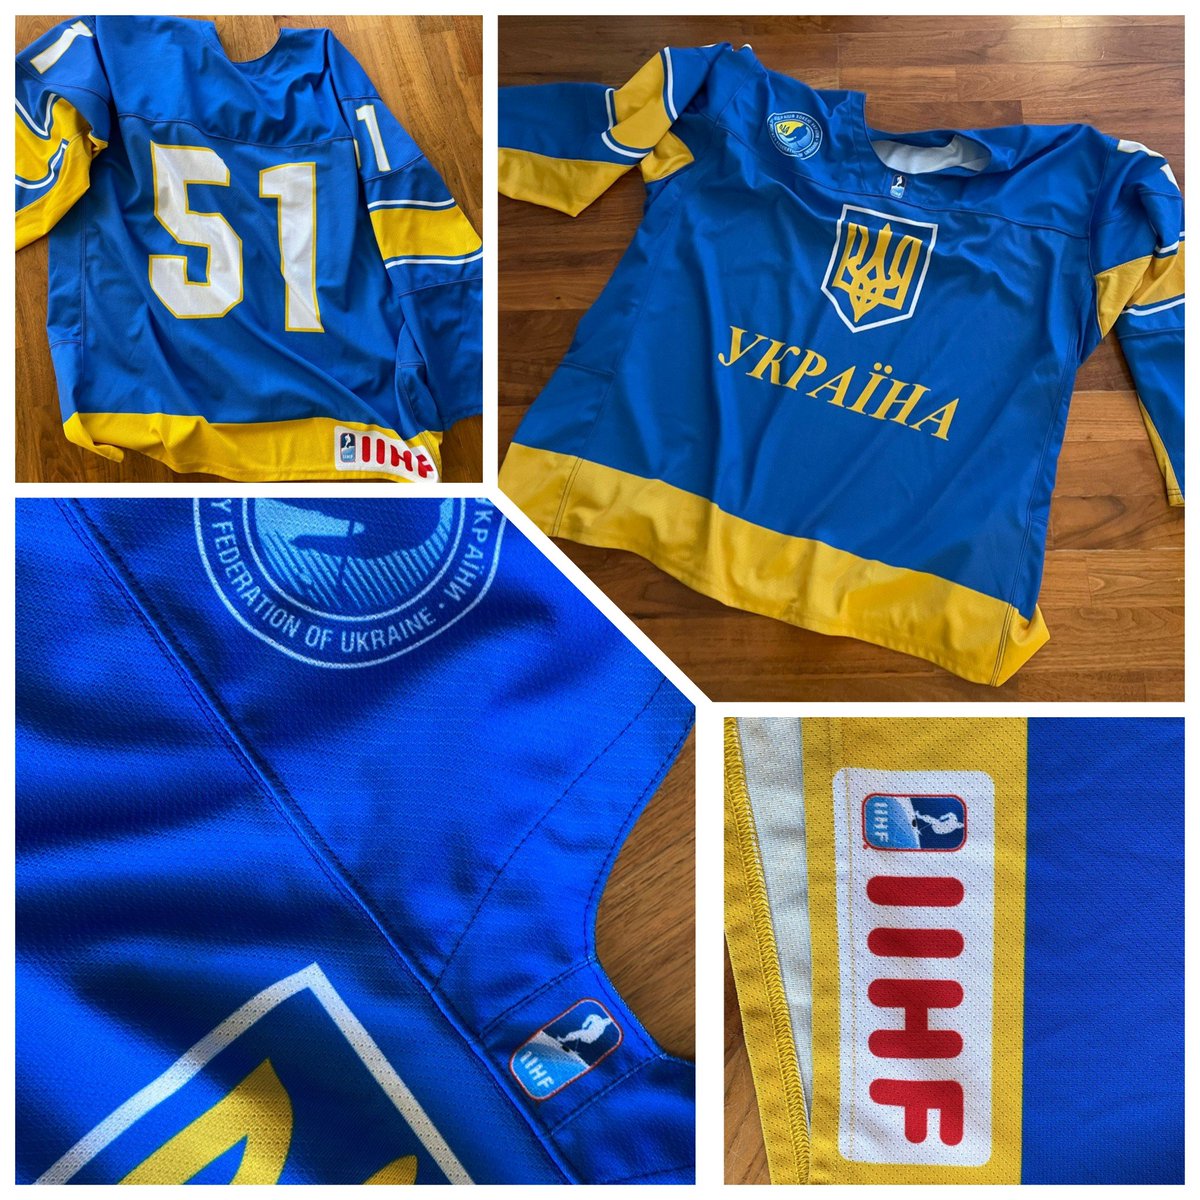 The Ice Hockey World Championships are starting soon in Czechia. Now we offer a fantastic opportunity to wear an appropriate jersey for the occasion. The jersey was donated to us by @SarahAshtonLV (size 56). Highest bid will win and all proceeds will go to @ambulances4U